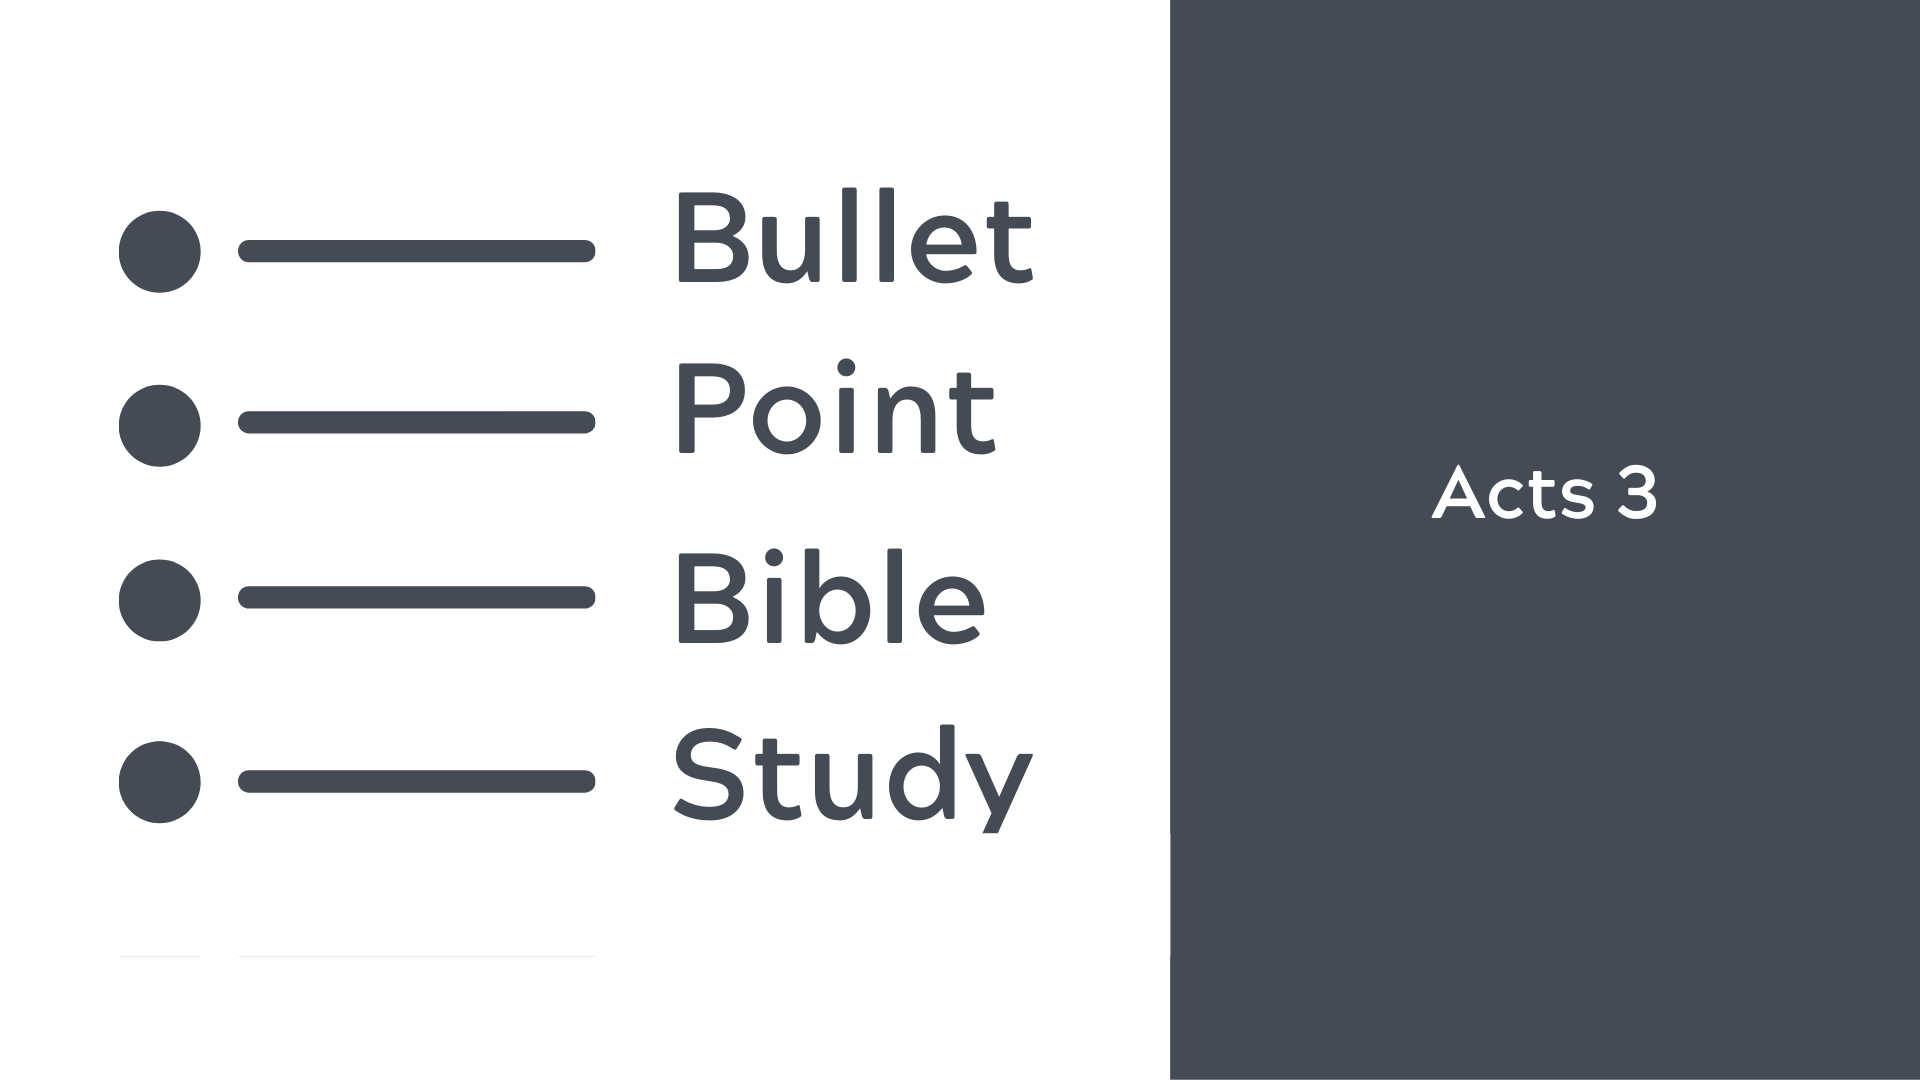 Bullet Point Bible Study - Acts 3